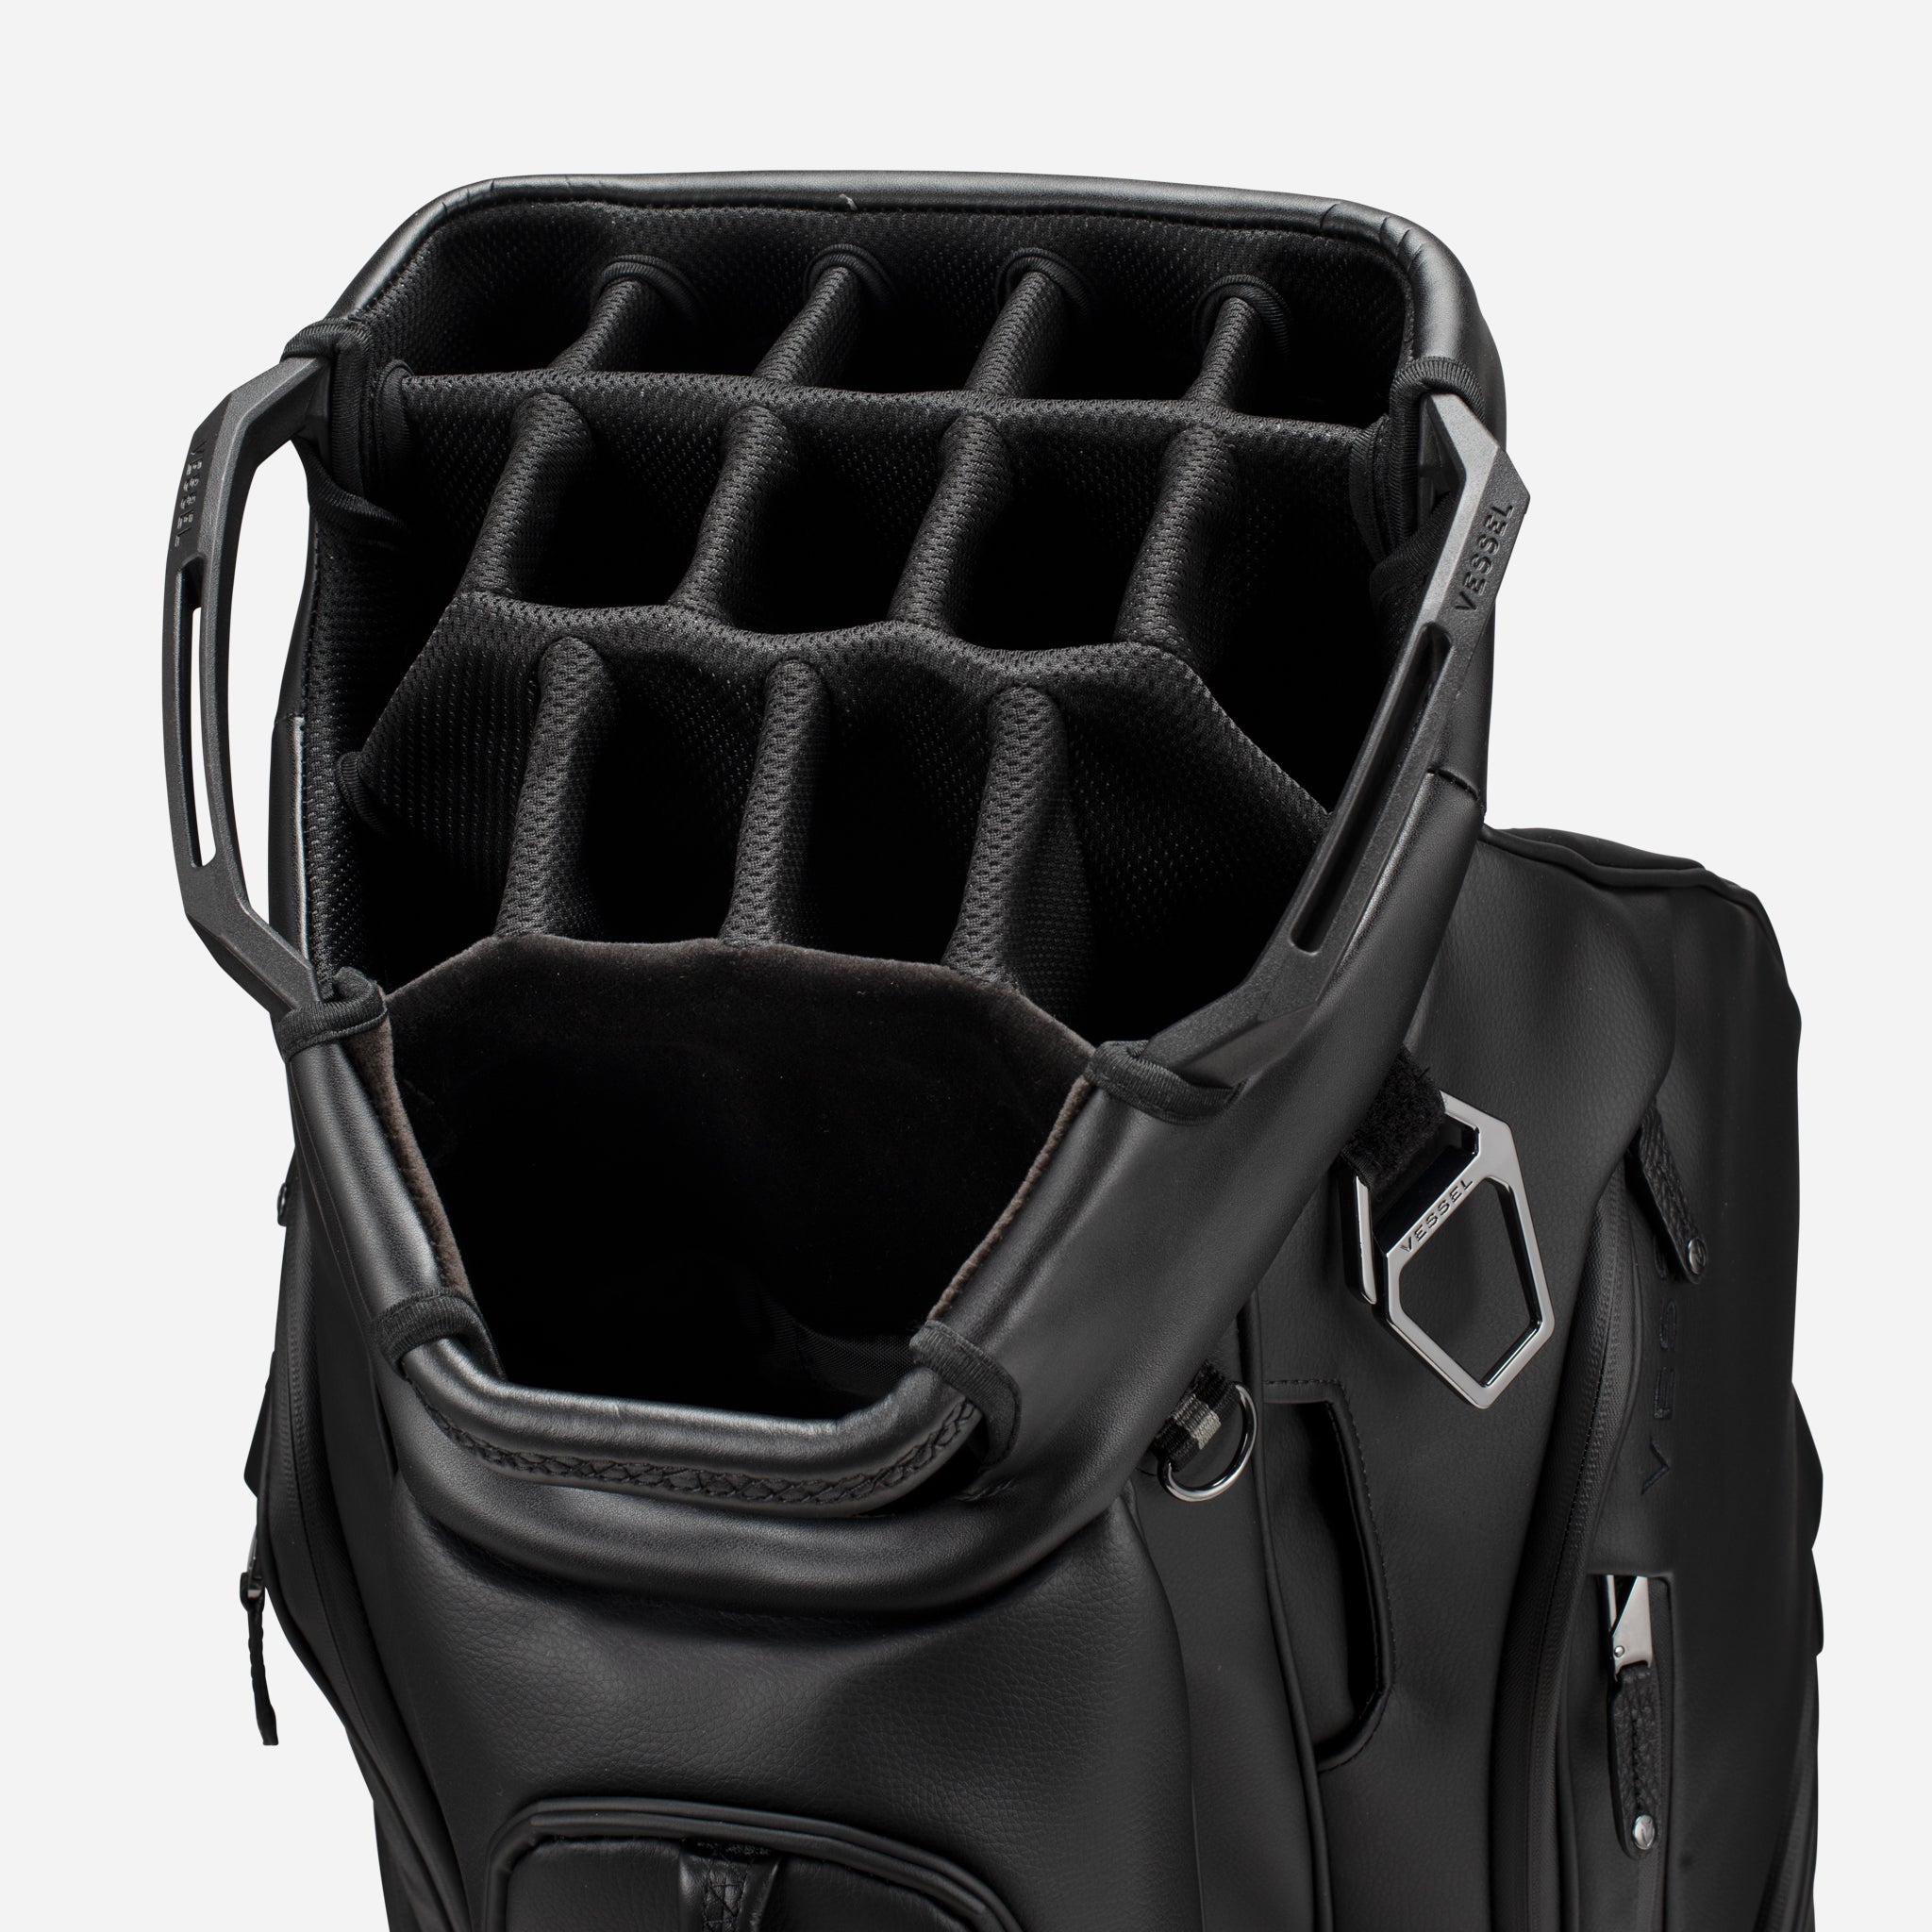 Lux XV Cart Bag by VESSEL  Golf bags, Bags, Product launch